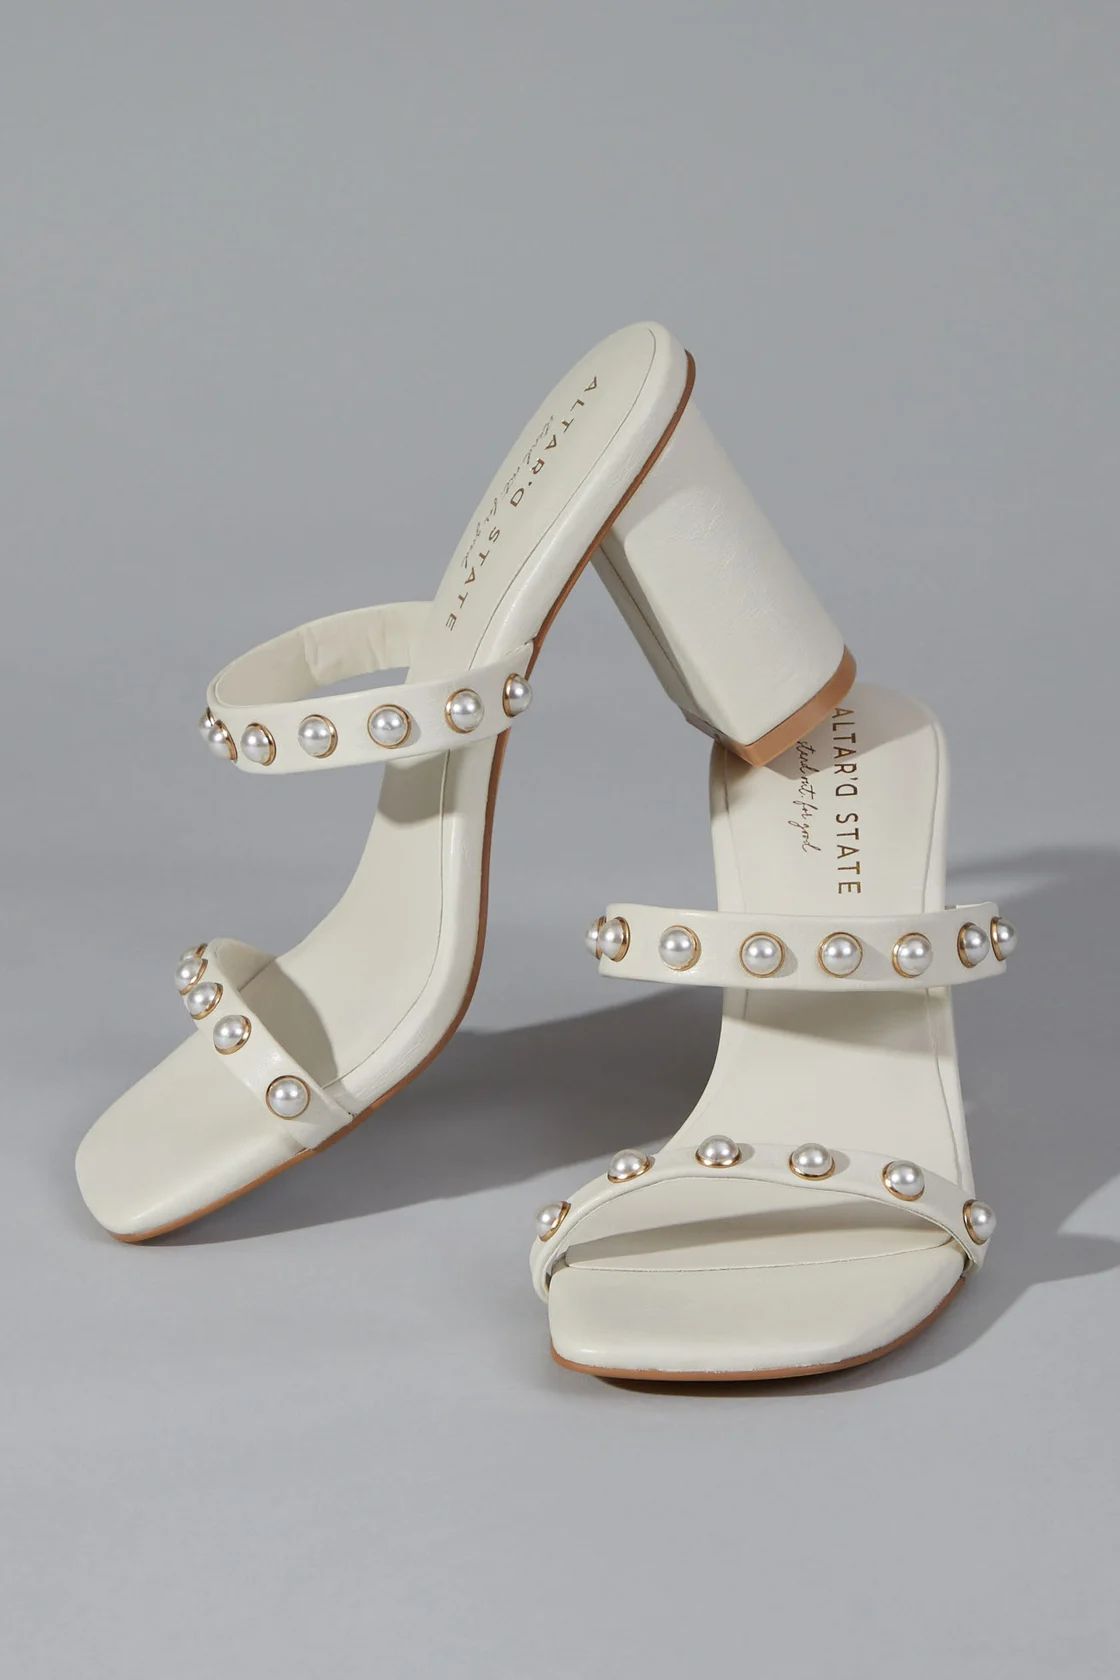 Victoria Pearl Heels in Ivory | Altar'd State | Altar'd State